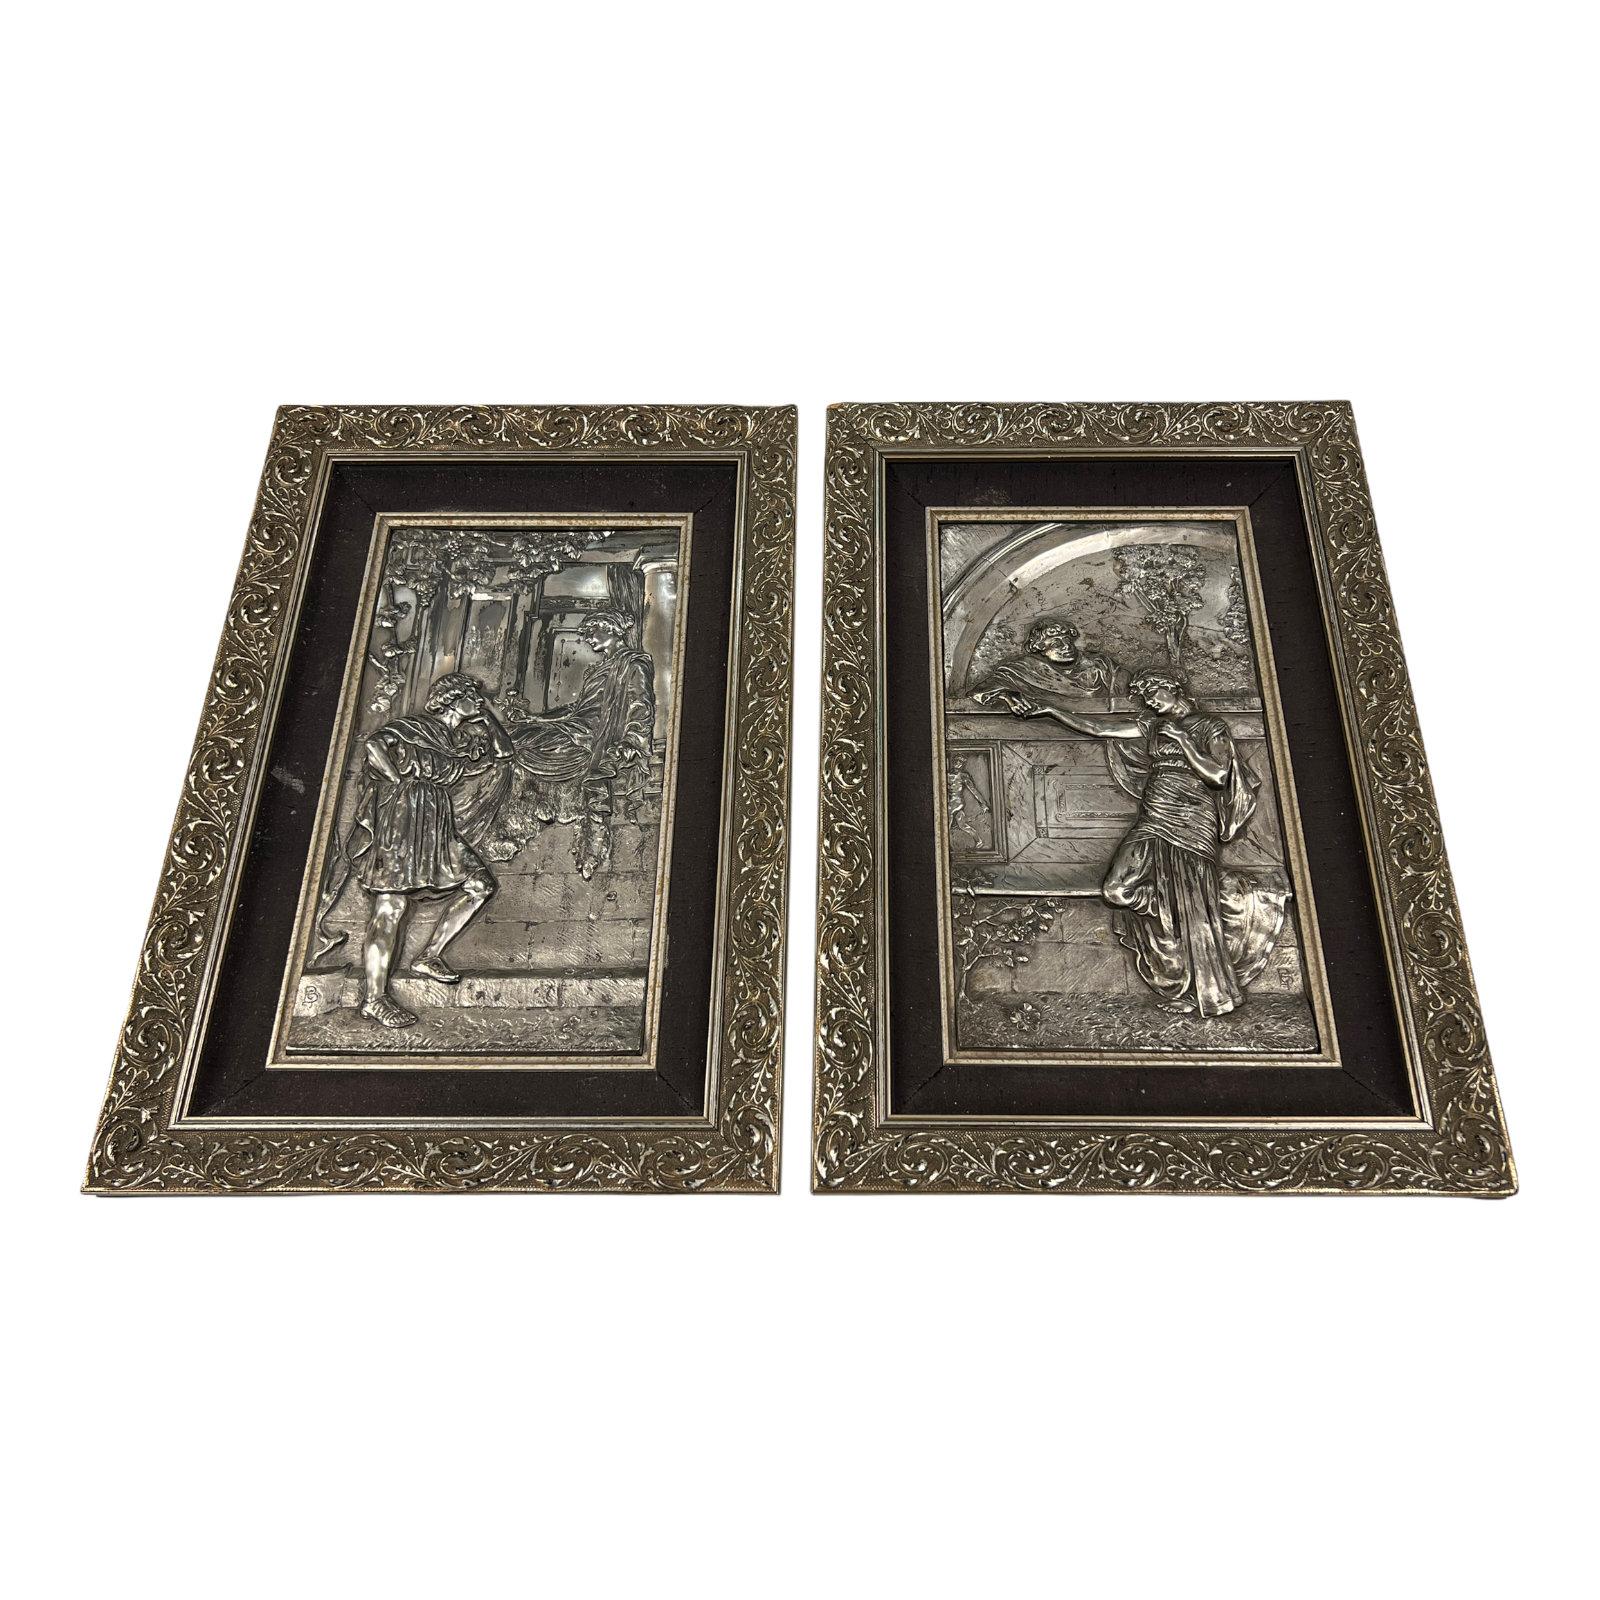 Pair of romantic silvered metal framed plaques depicting figures in the Roman neoclassical style. Signed with monogram GB (or BG).